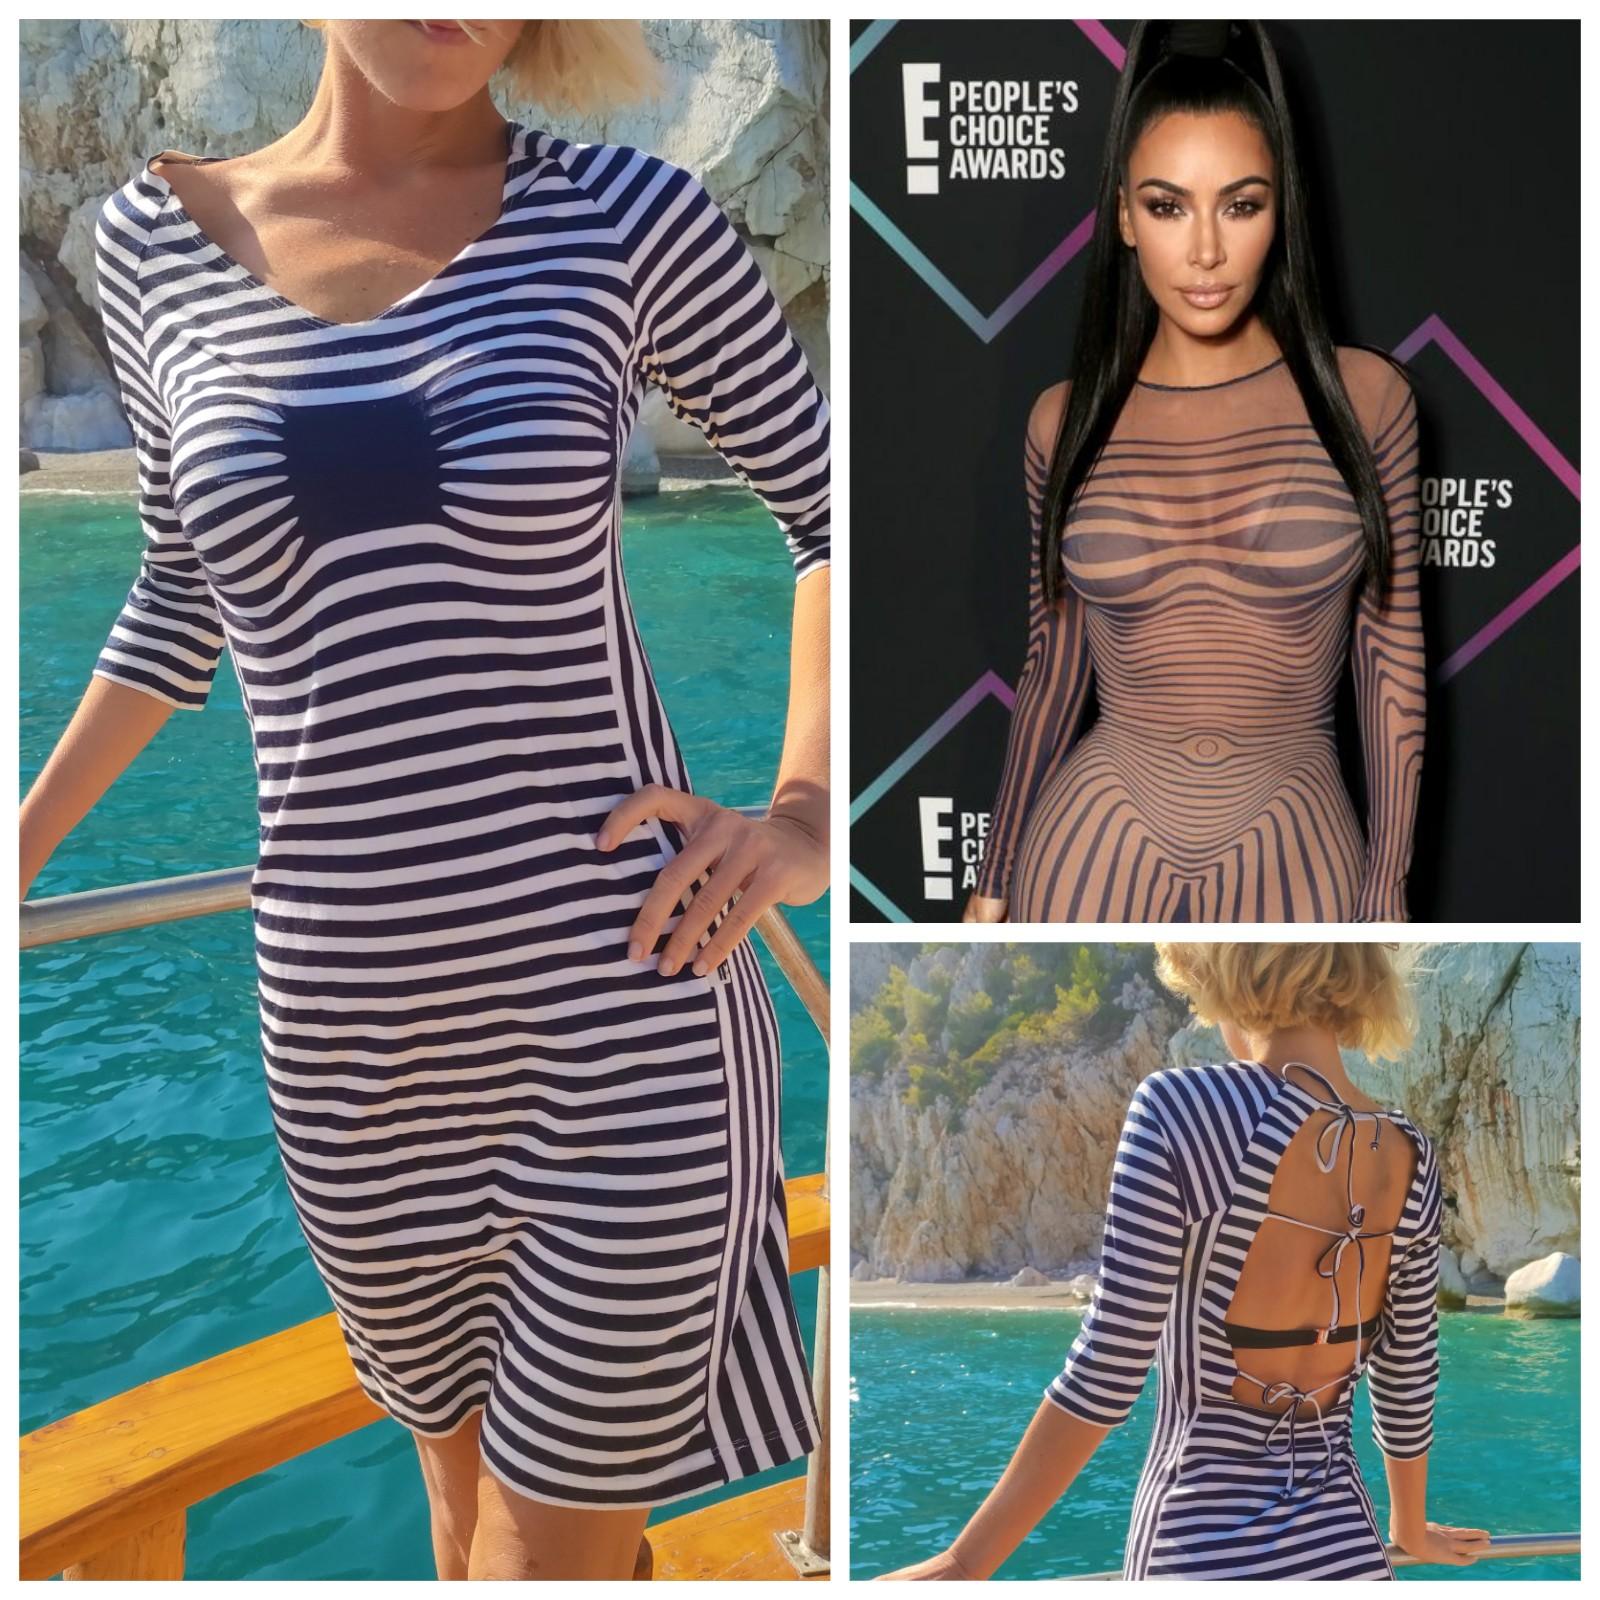 Iconic Optical Illusion dress by Jean Paul Gaultier!

One of the most iconic Jean-Paul Gaultier prints, initially showed at Spring-Summer 1996 collection, Celebrities’ most prominent statement looks - from Janelle Monae to Kim Kardashian!
The